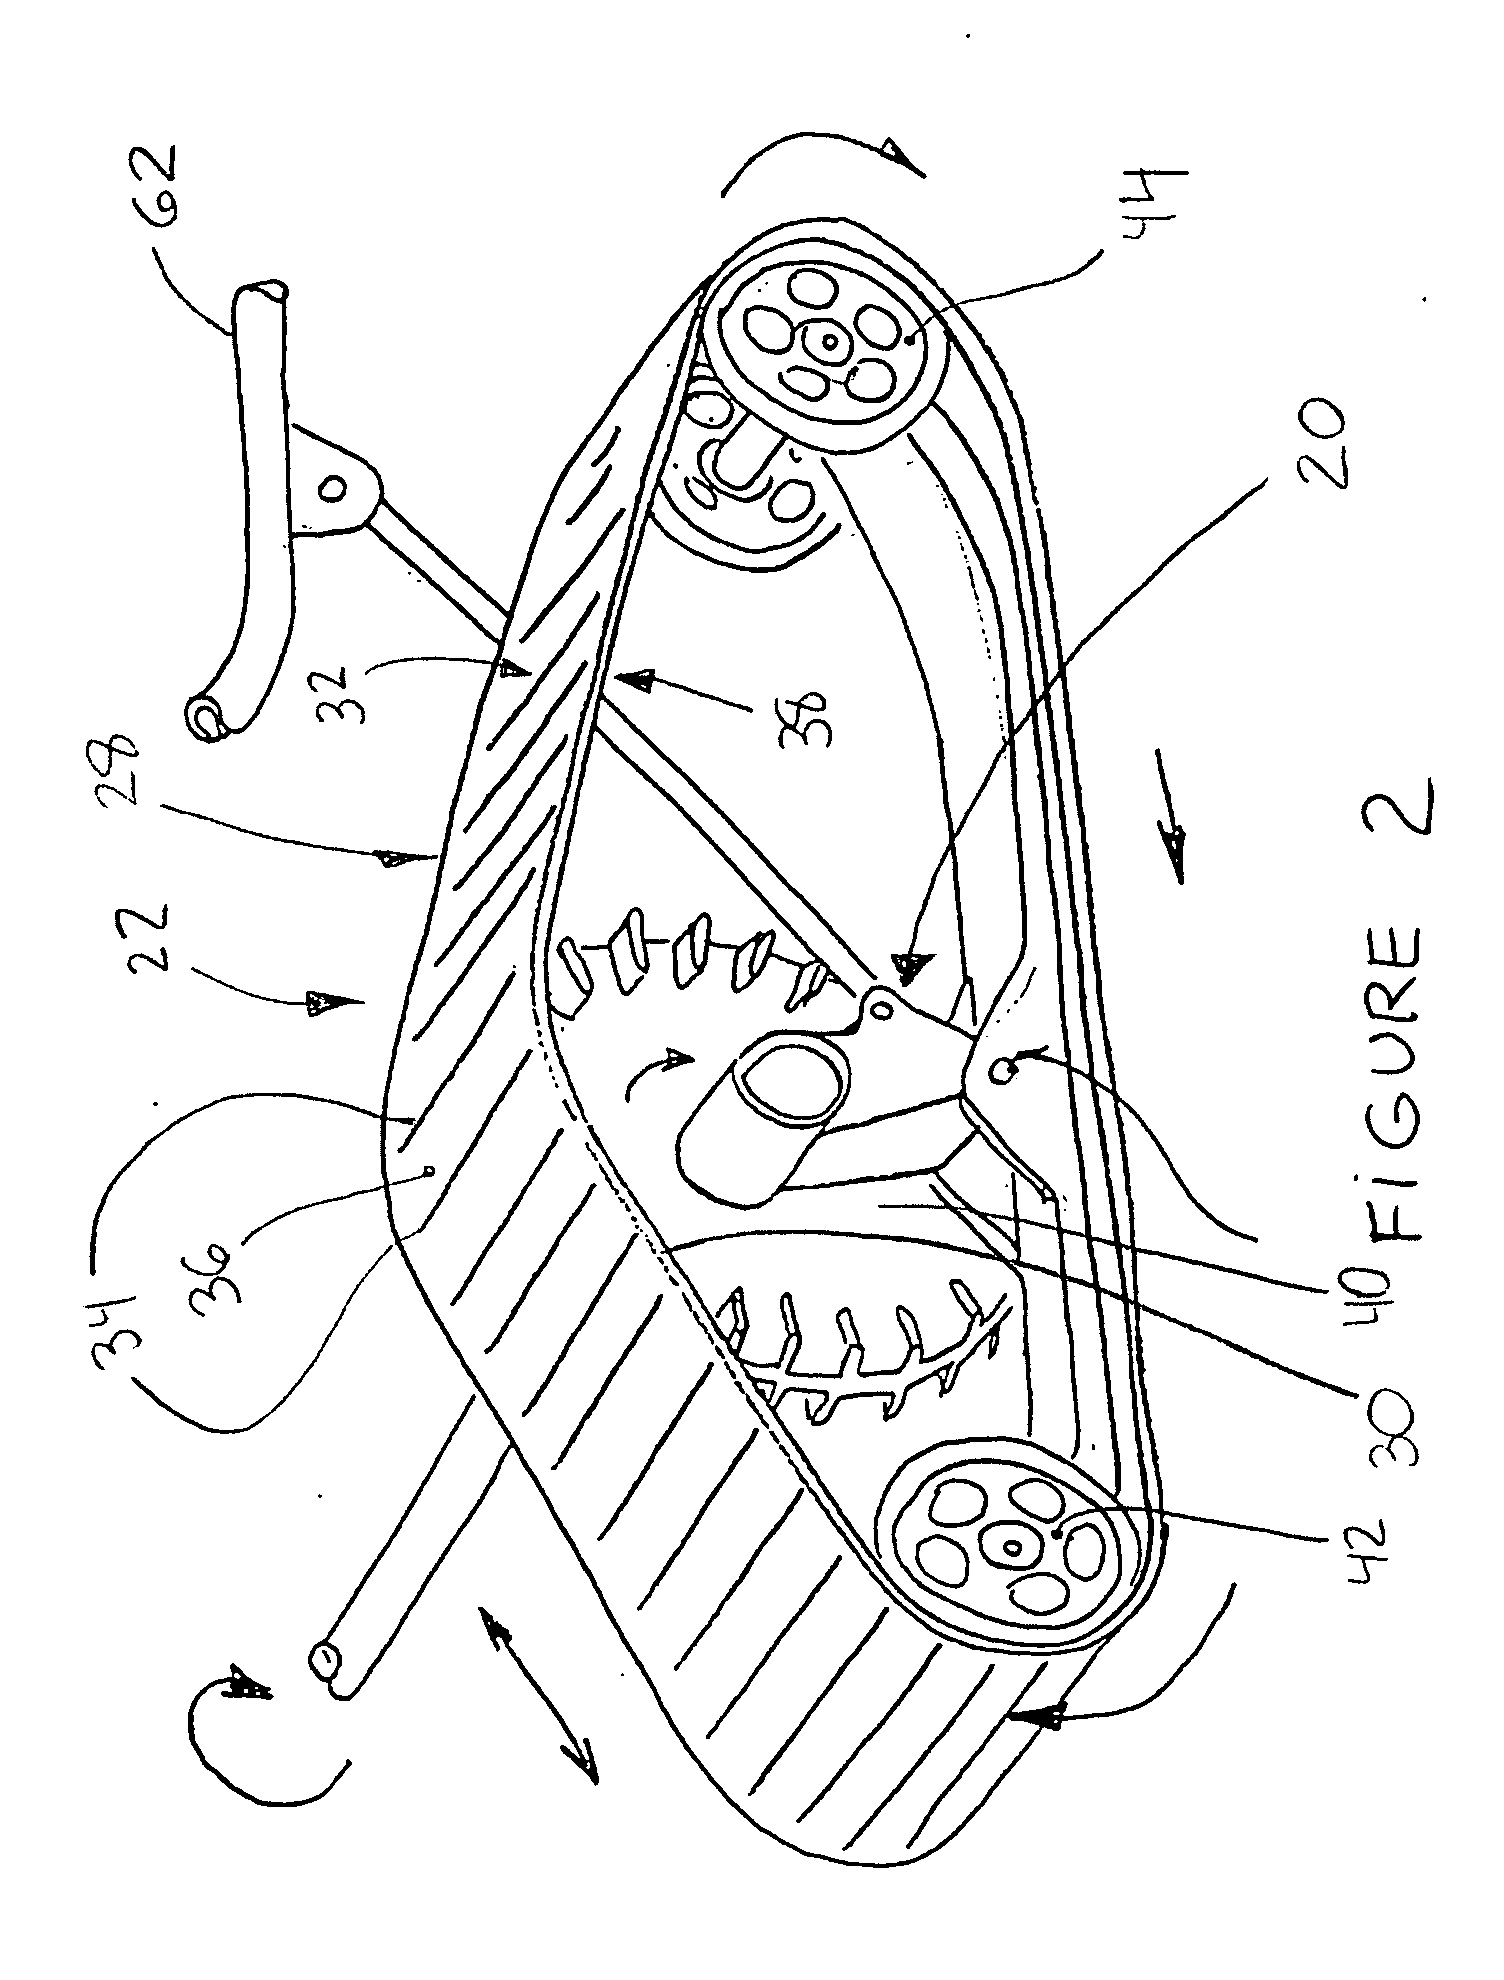 Traction assembly for a vehicle